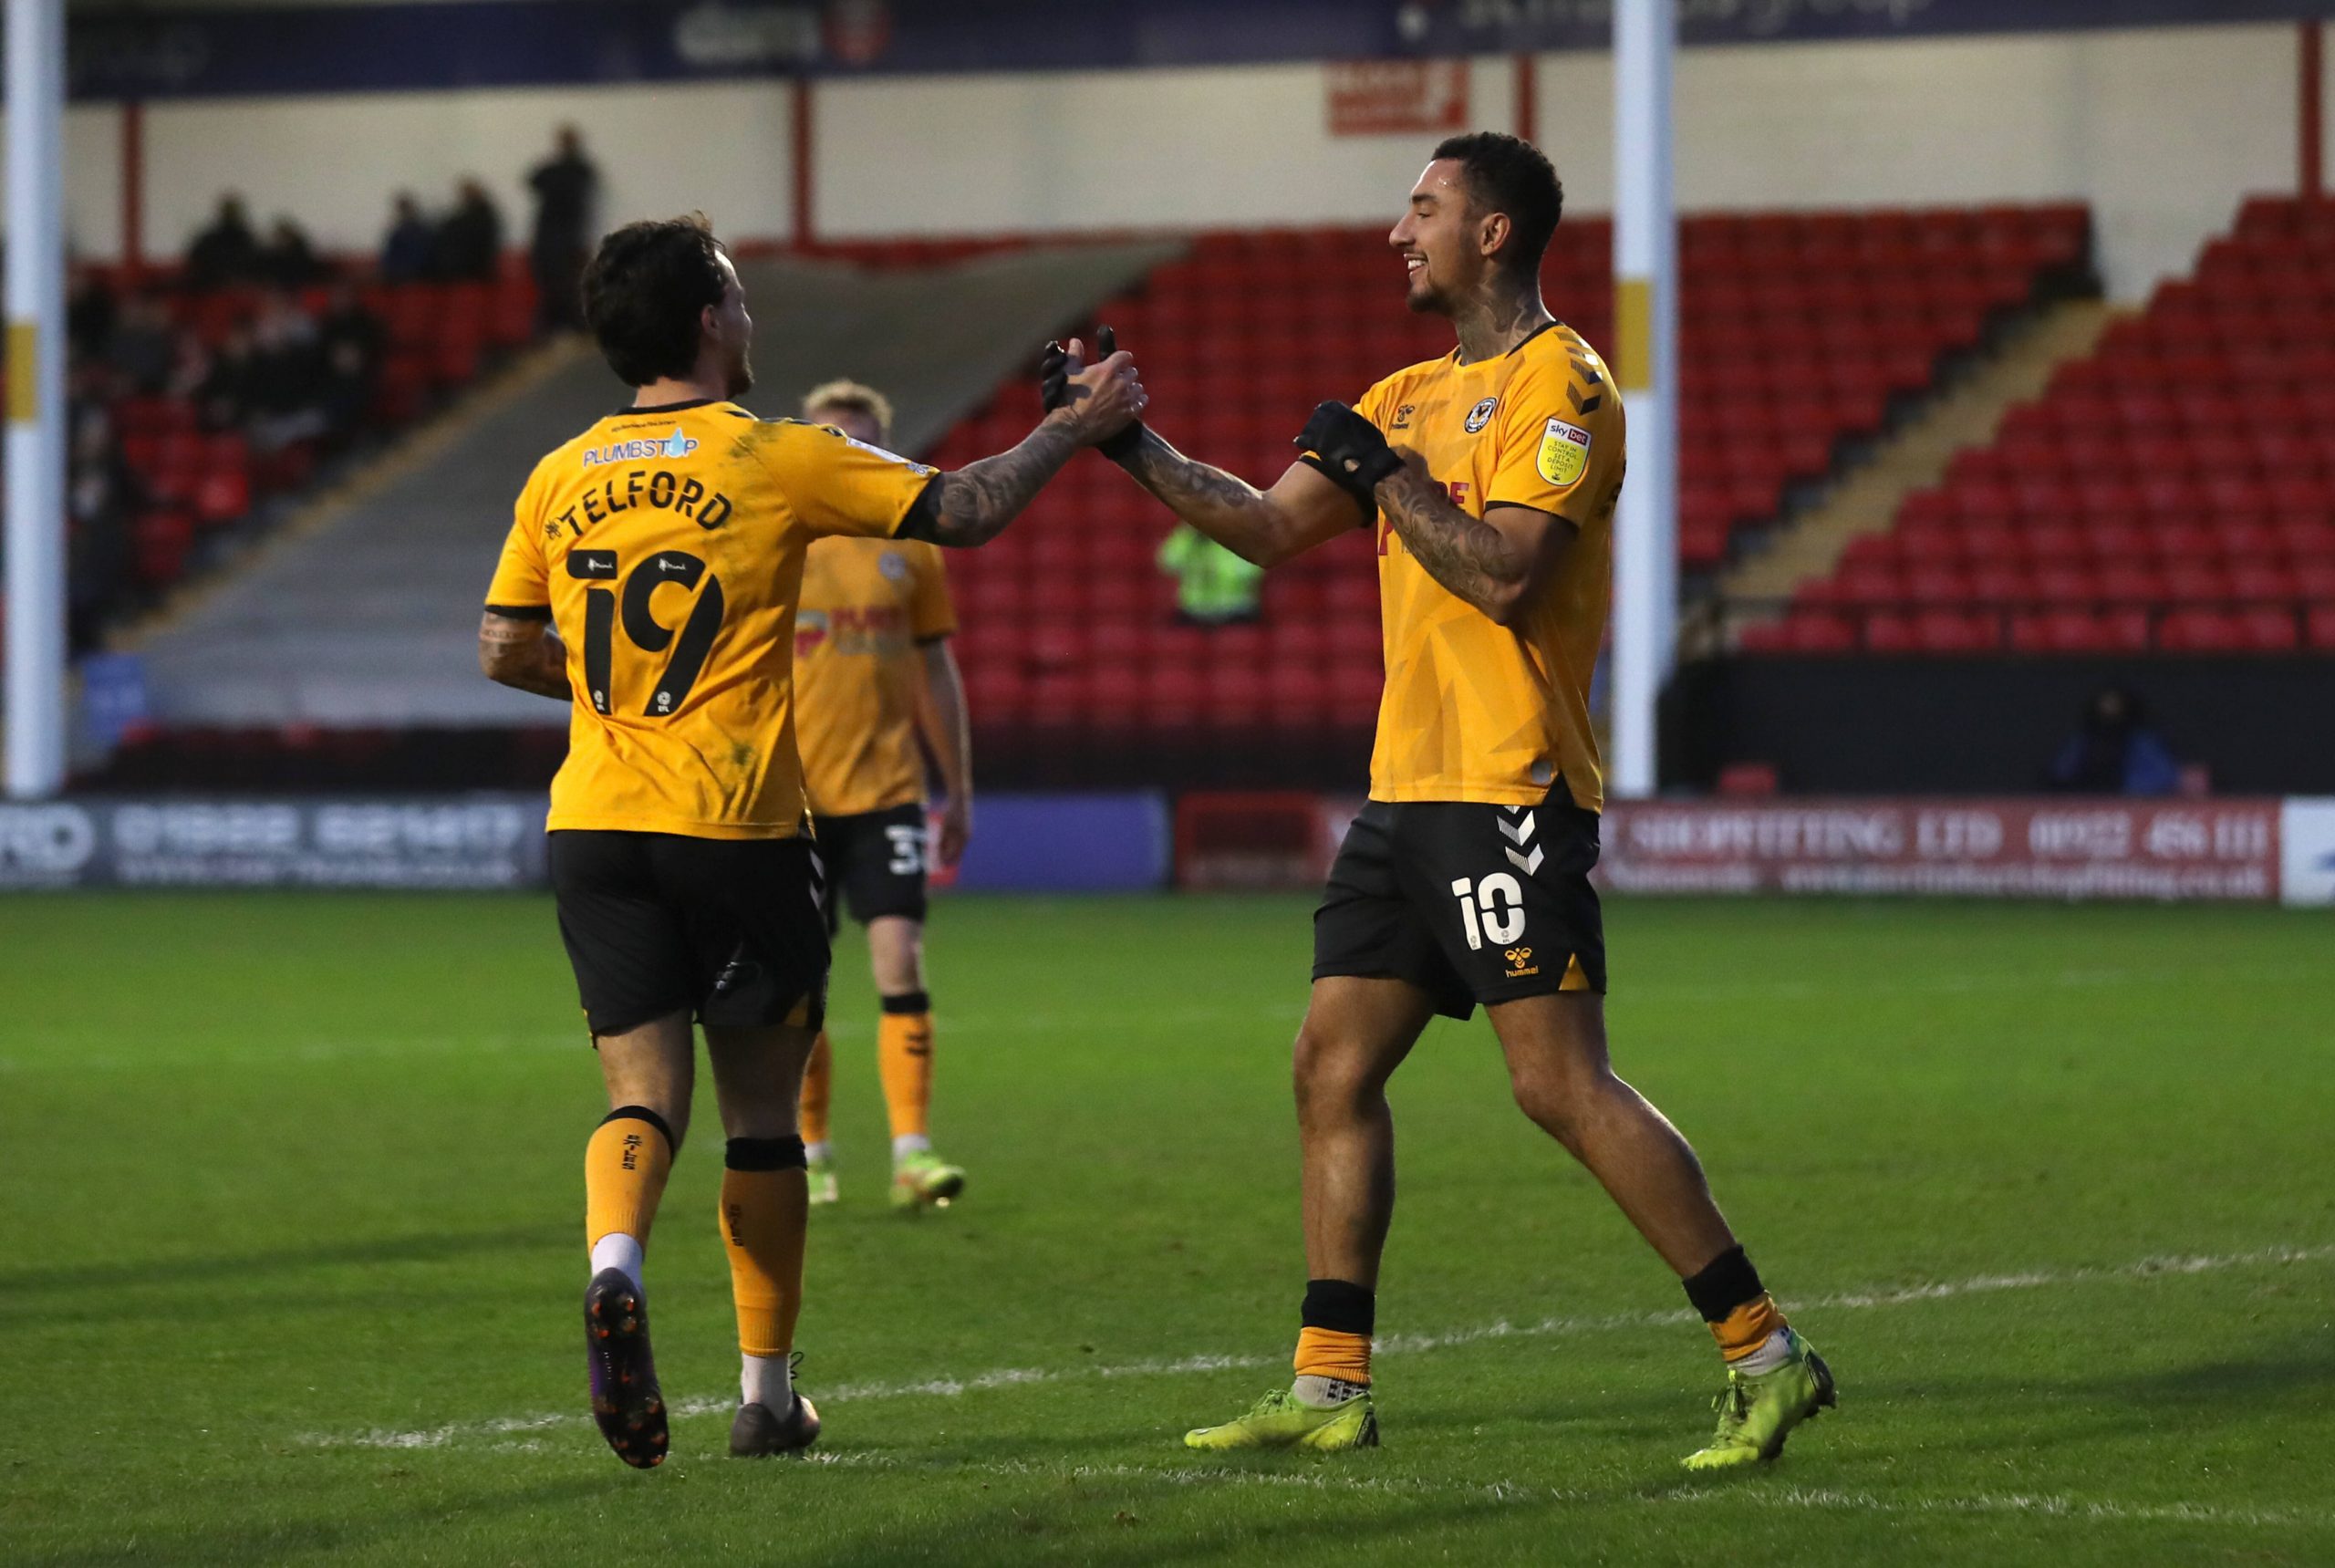 Walsall v Newport County - Sky Bet League Two - Banks s Stadium Newport County s Dominic Telford left celebrates with Courtney Baker-Richardson after Walsall s Conor Wilkinson not pictured scores an own goal during the Sky Bet League Two match at Banks s Stadium, Walsall. Picture date: Saturday January 1, 2022. EDITORIAL USE ONLY No use with unauthorised audio, video, data, fixture lists, club/league logos or live services. Online in-match use limited to 120 images, no video emulation. No use in betting, games or single club/league/player publications. PUBLICATIONxNOTxINxUKxIRL Copyright: xBradleyxCollyerx 64556674